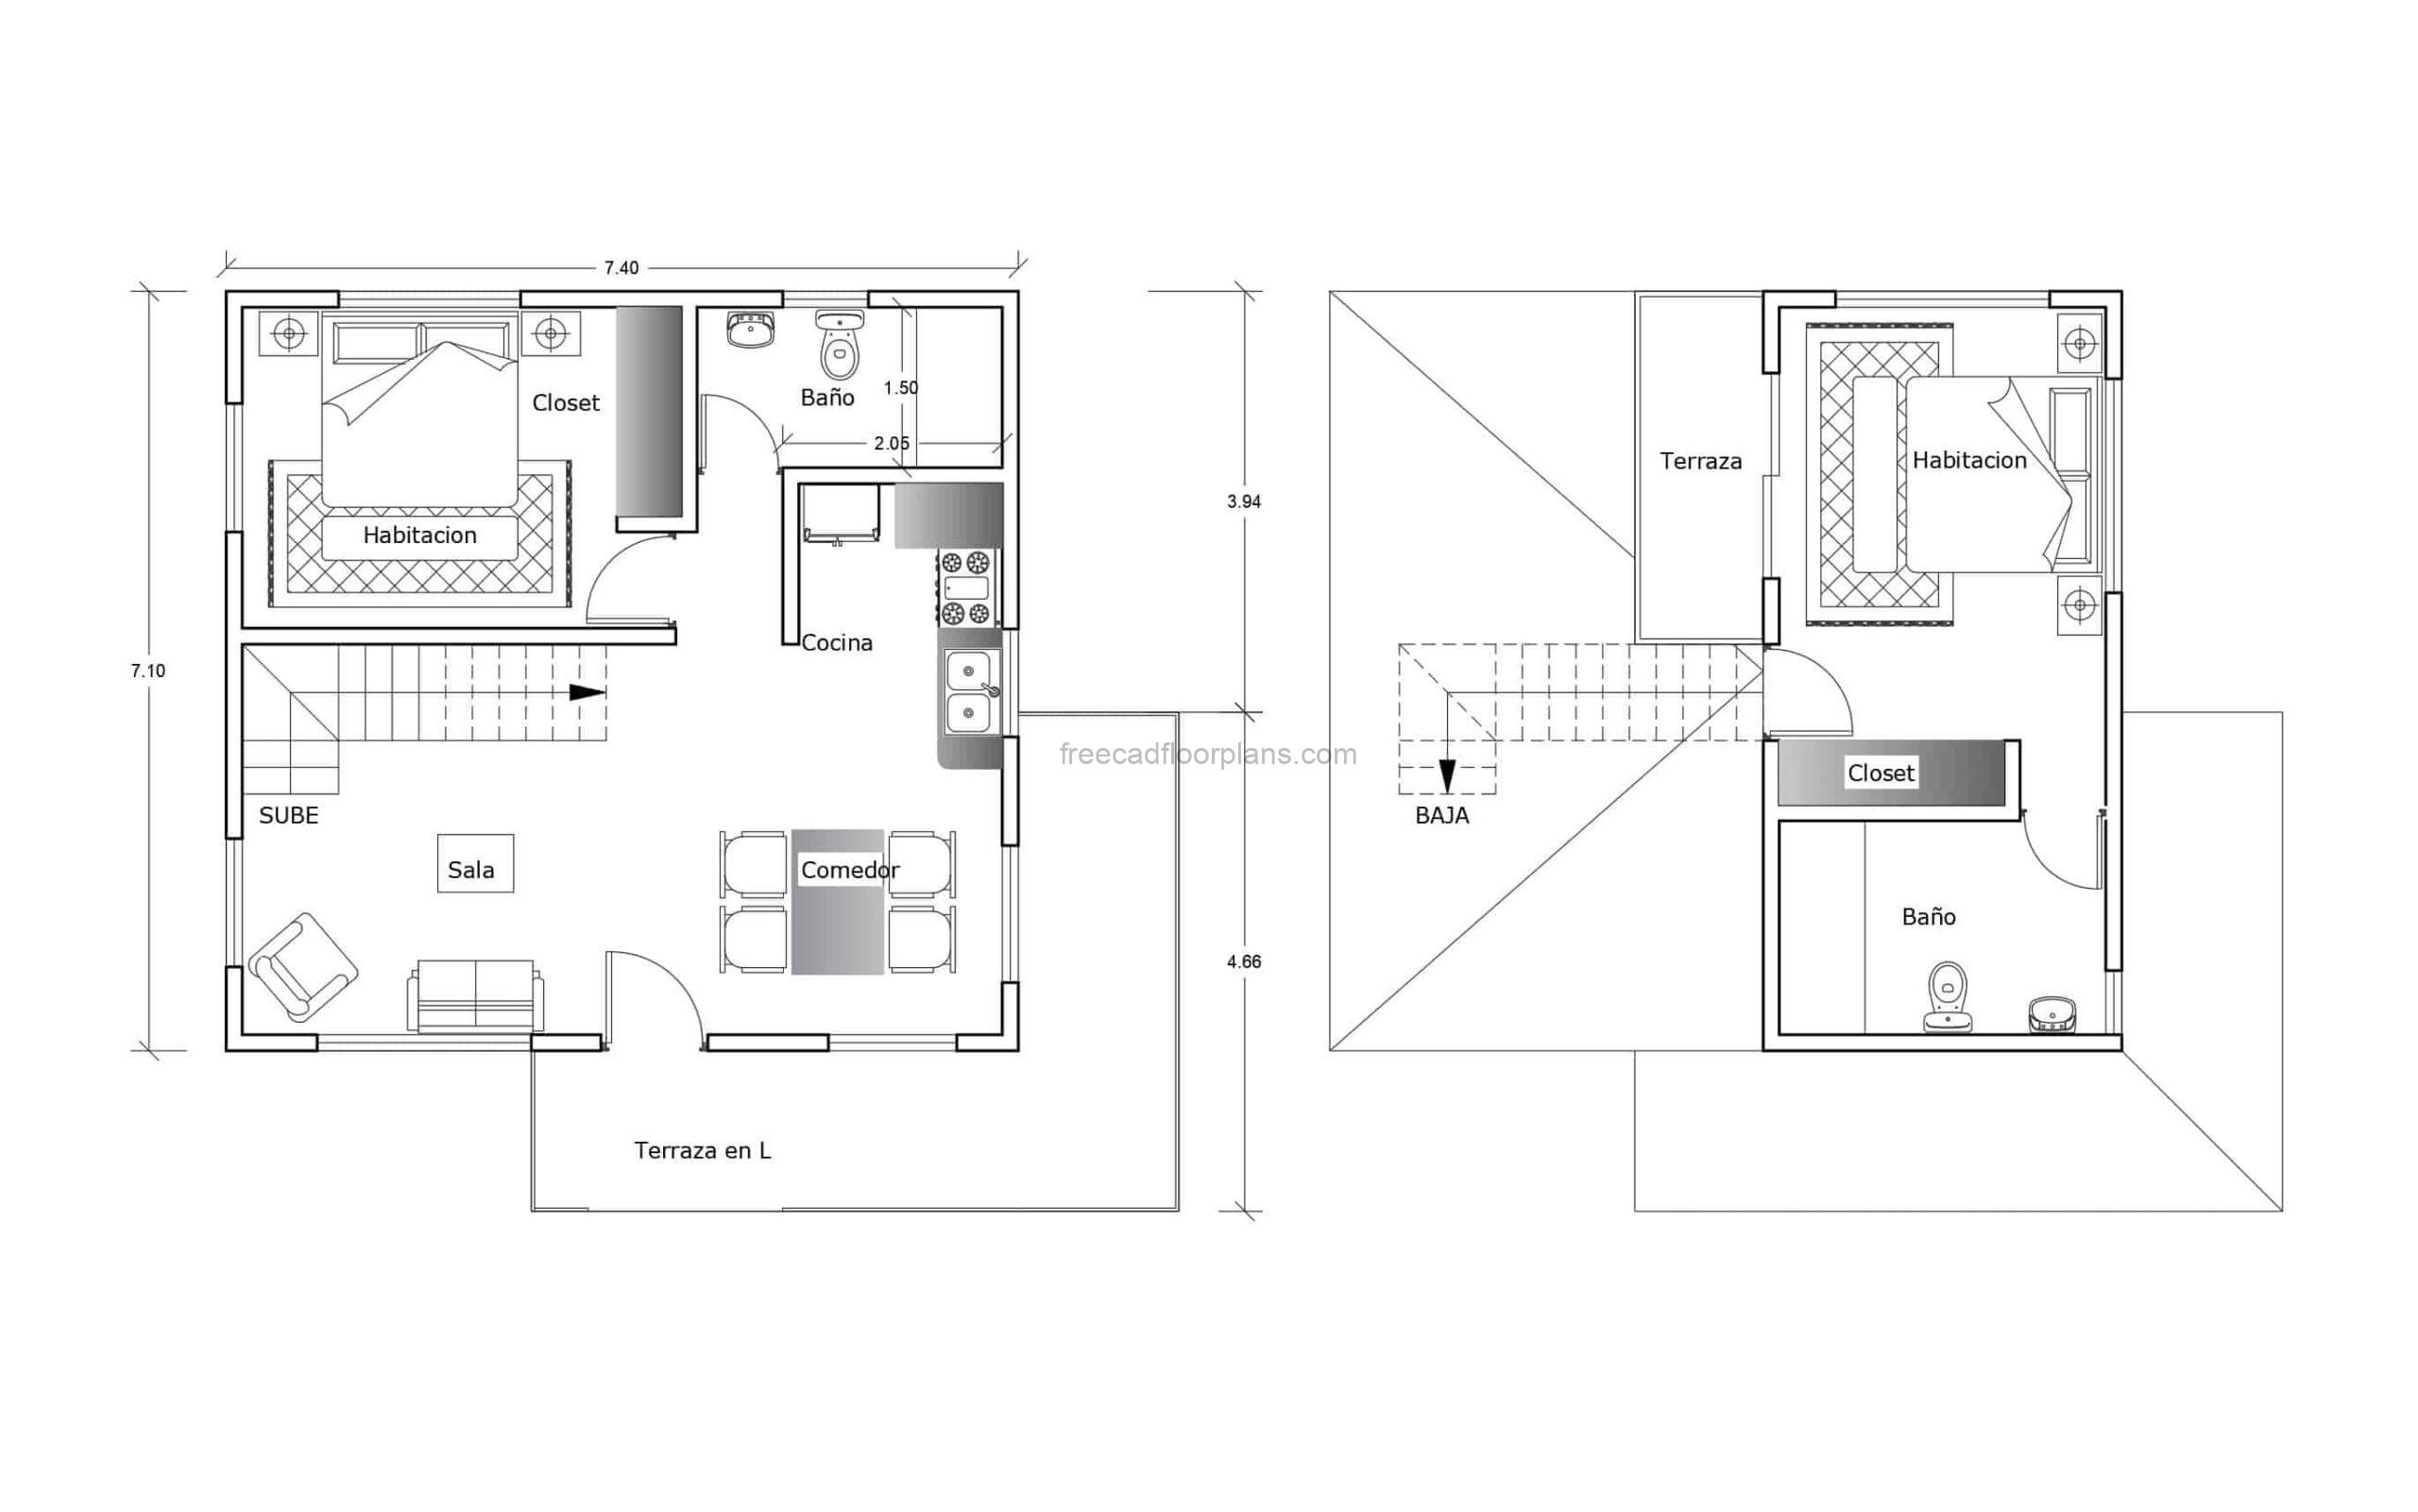 Two Bedroom House 968 sq. ft. dwg CAD file for free download, dimensioned layout